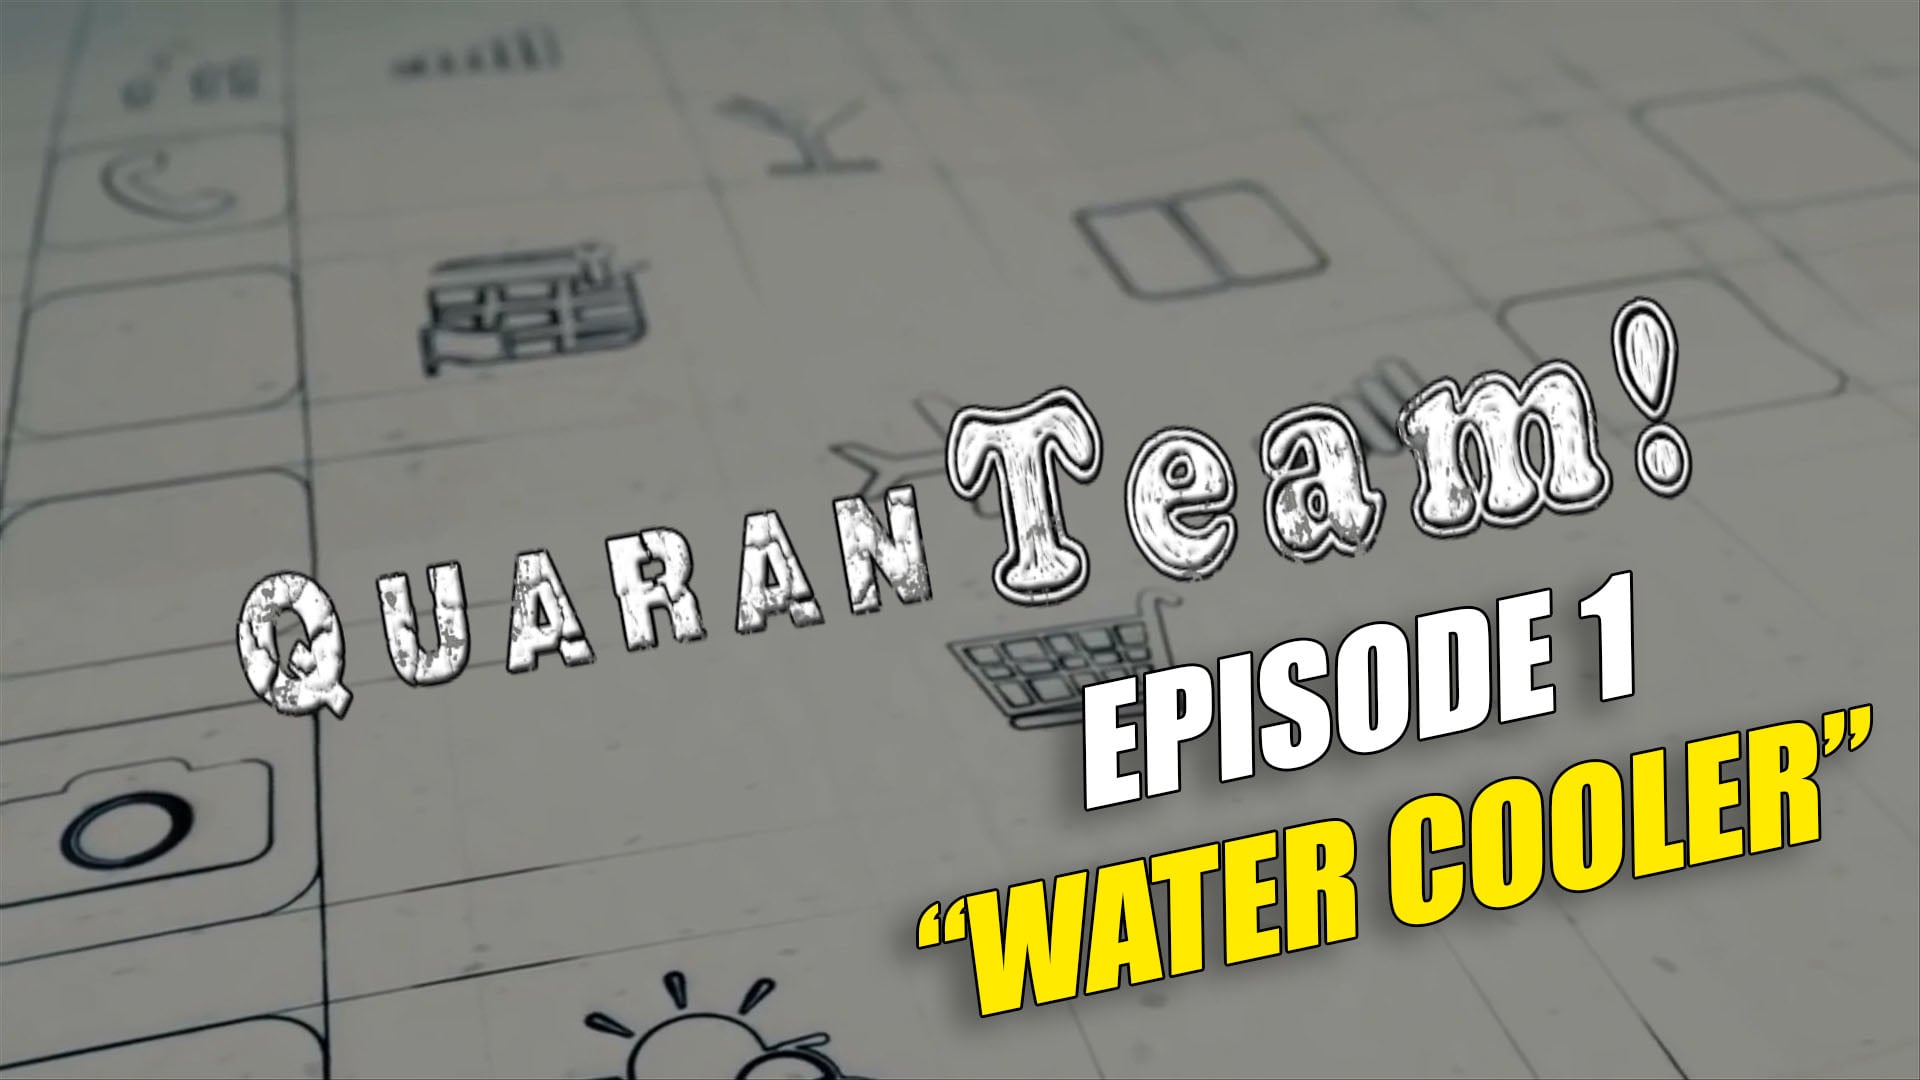 Watch QuaranTEAM! S1E01: Water Cooler on our Free Roku Channel